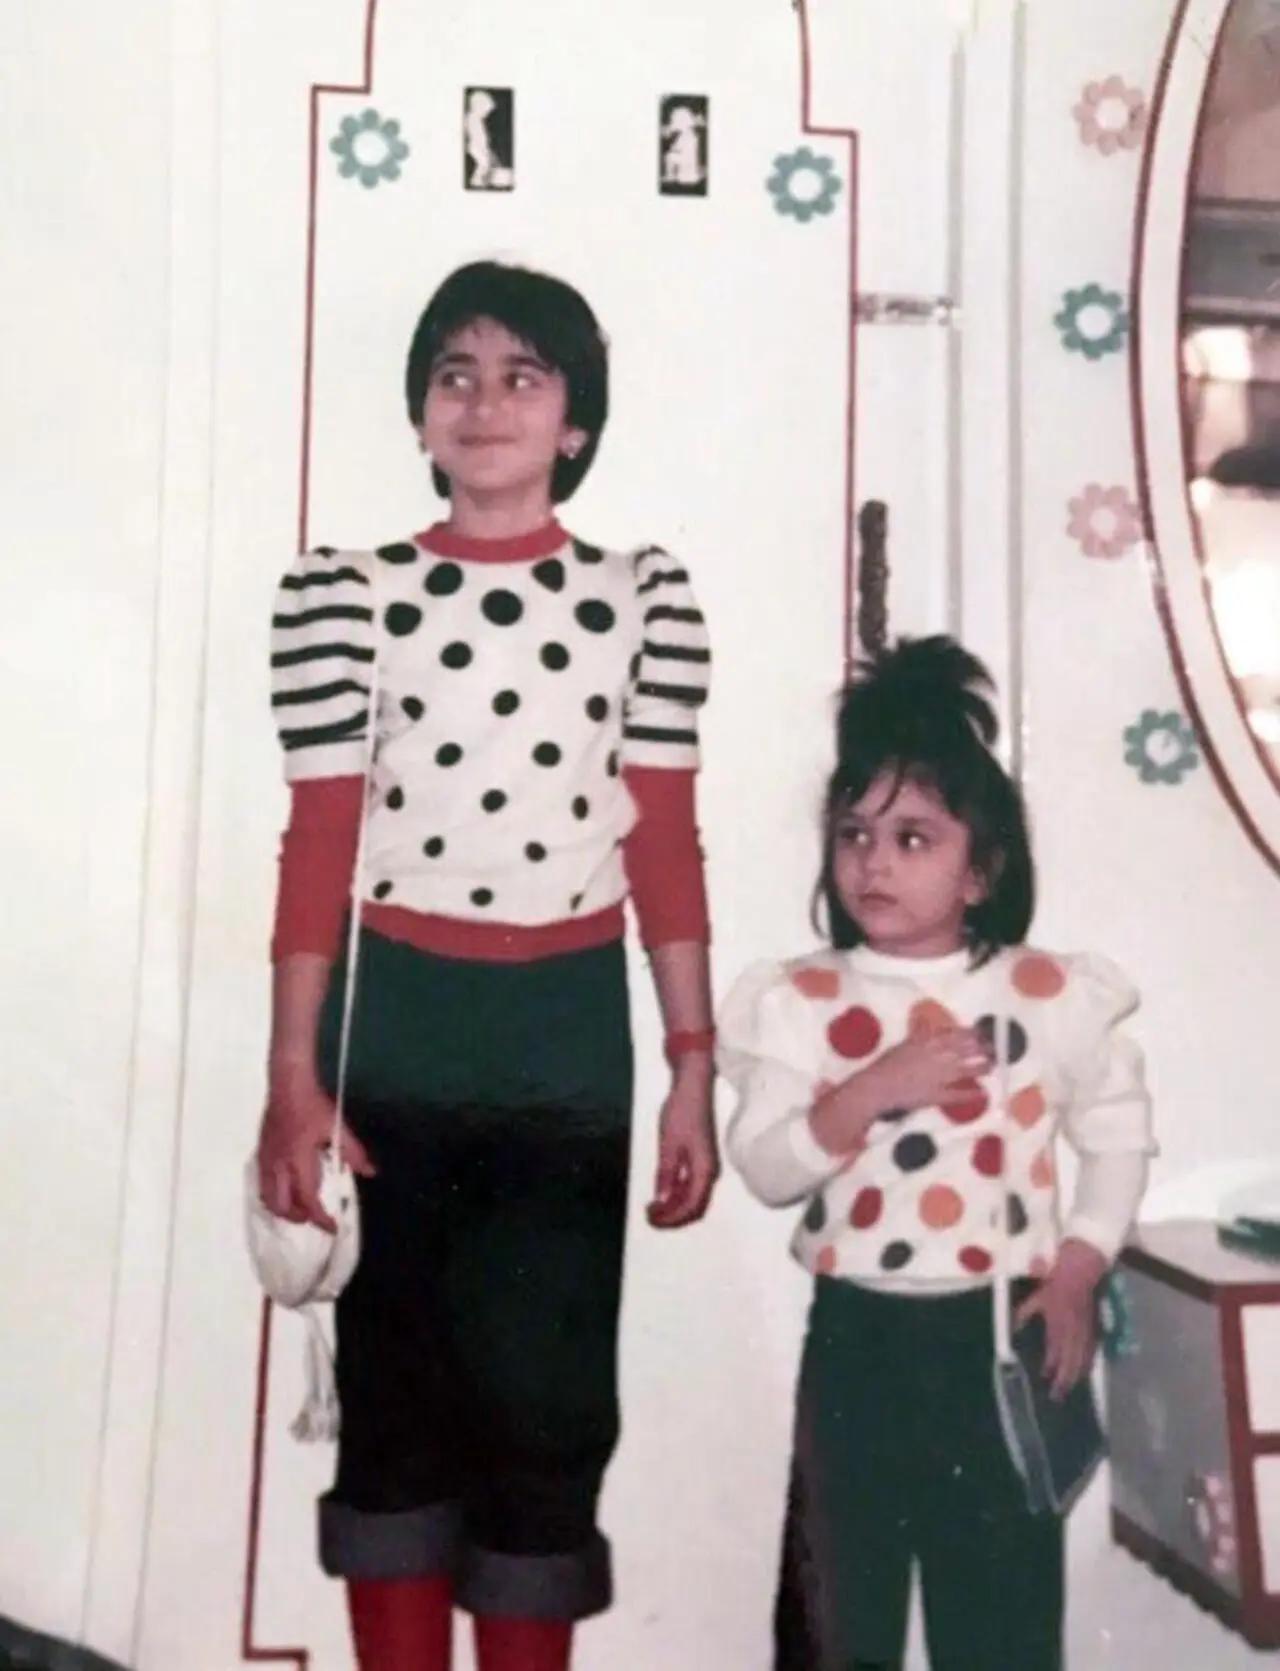 Karisma and Kareena, have always had a flair for fashion, as evidenced by a throwback snapshot shared by Karisma. She captioned the adorable photo, 